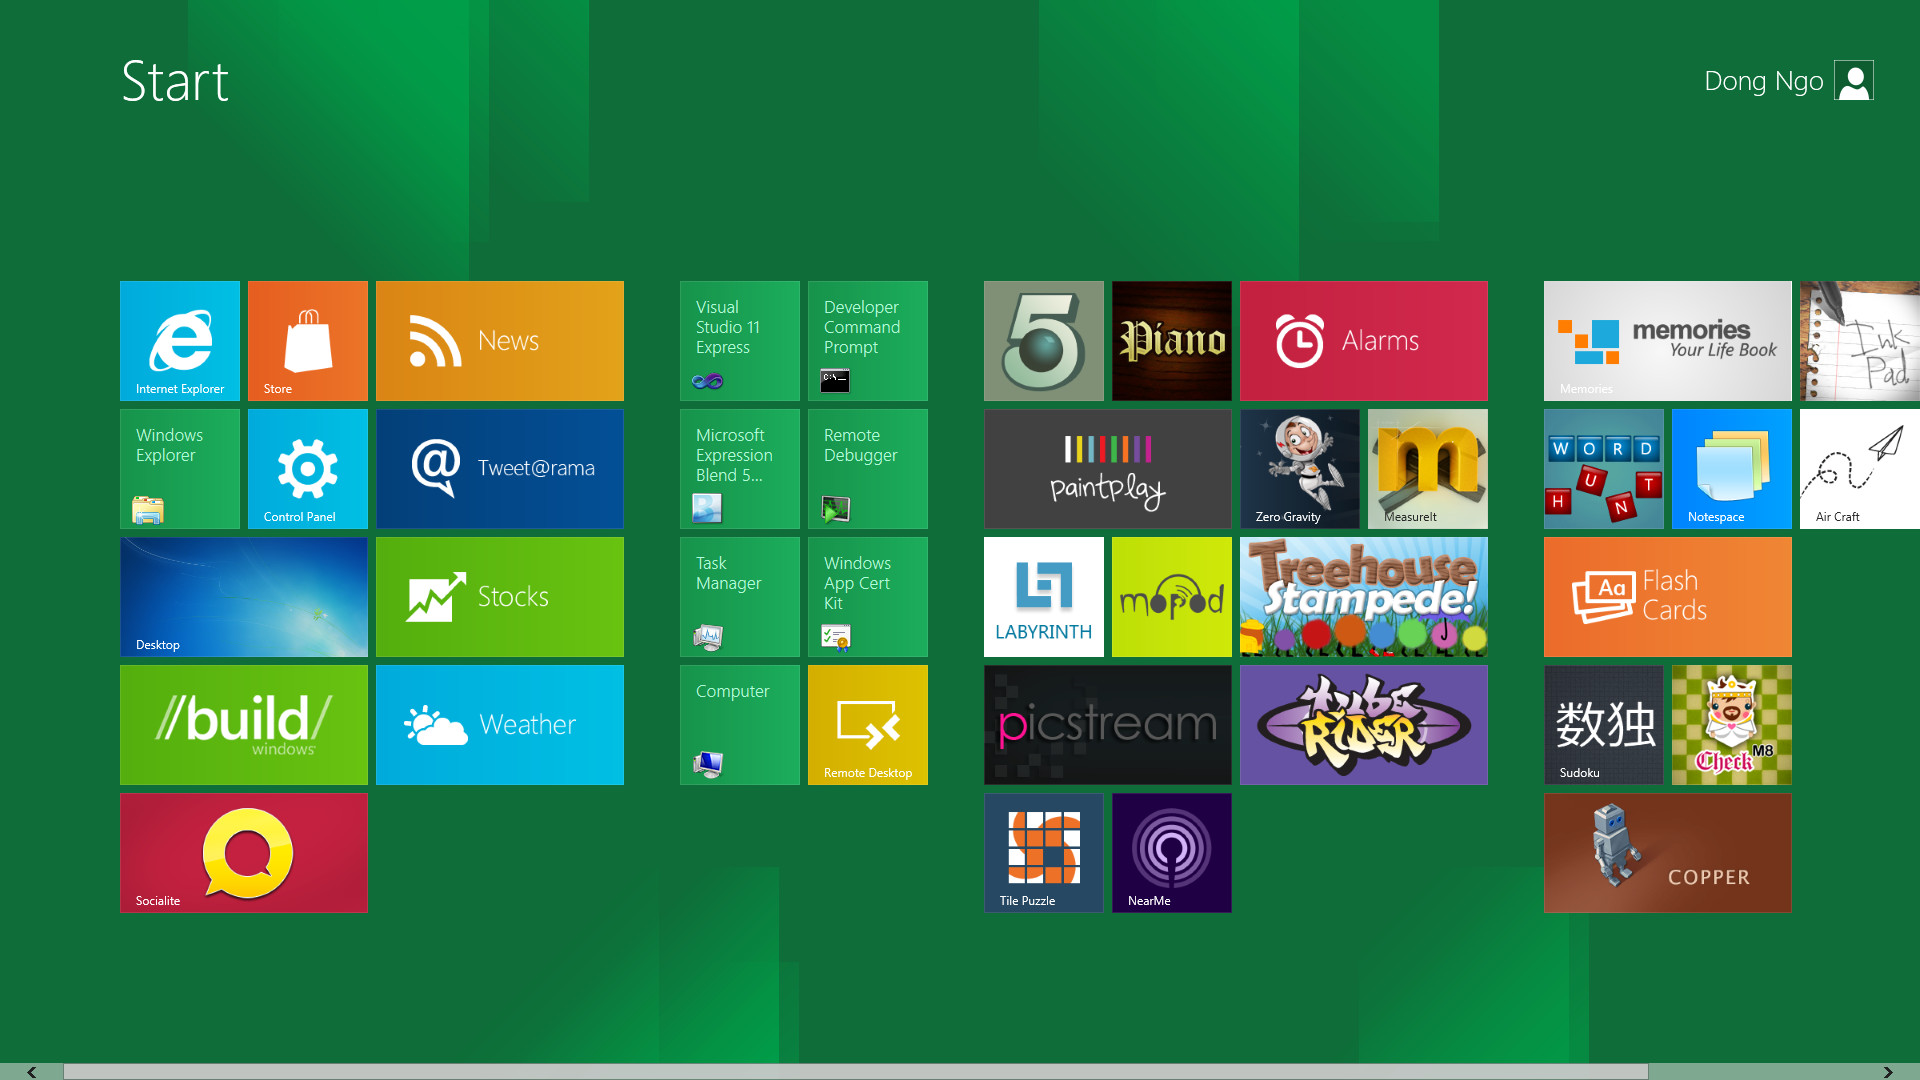 1920x1080 In Windows 8, the Start menu is no longer what it used to be. Dong Ngo/CNET